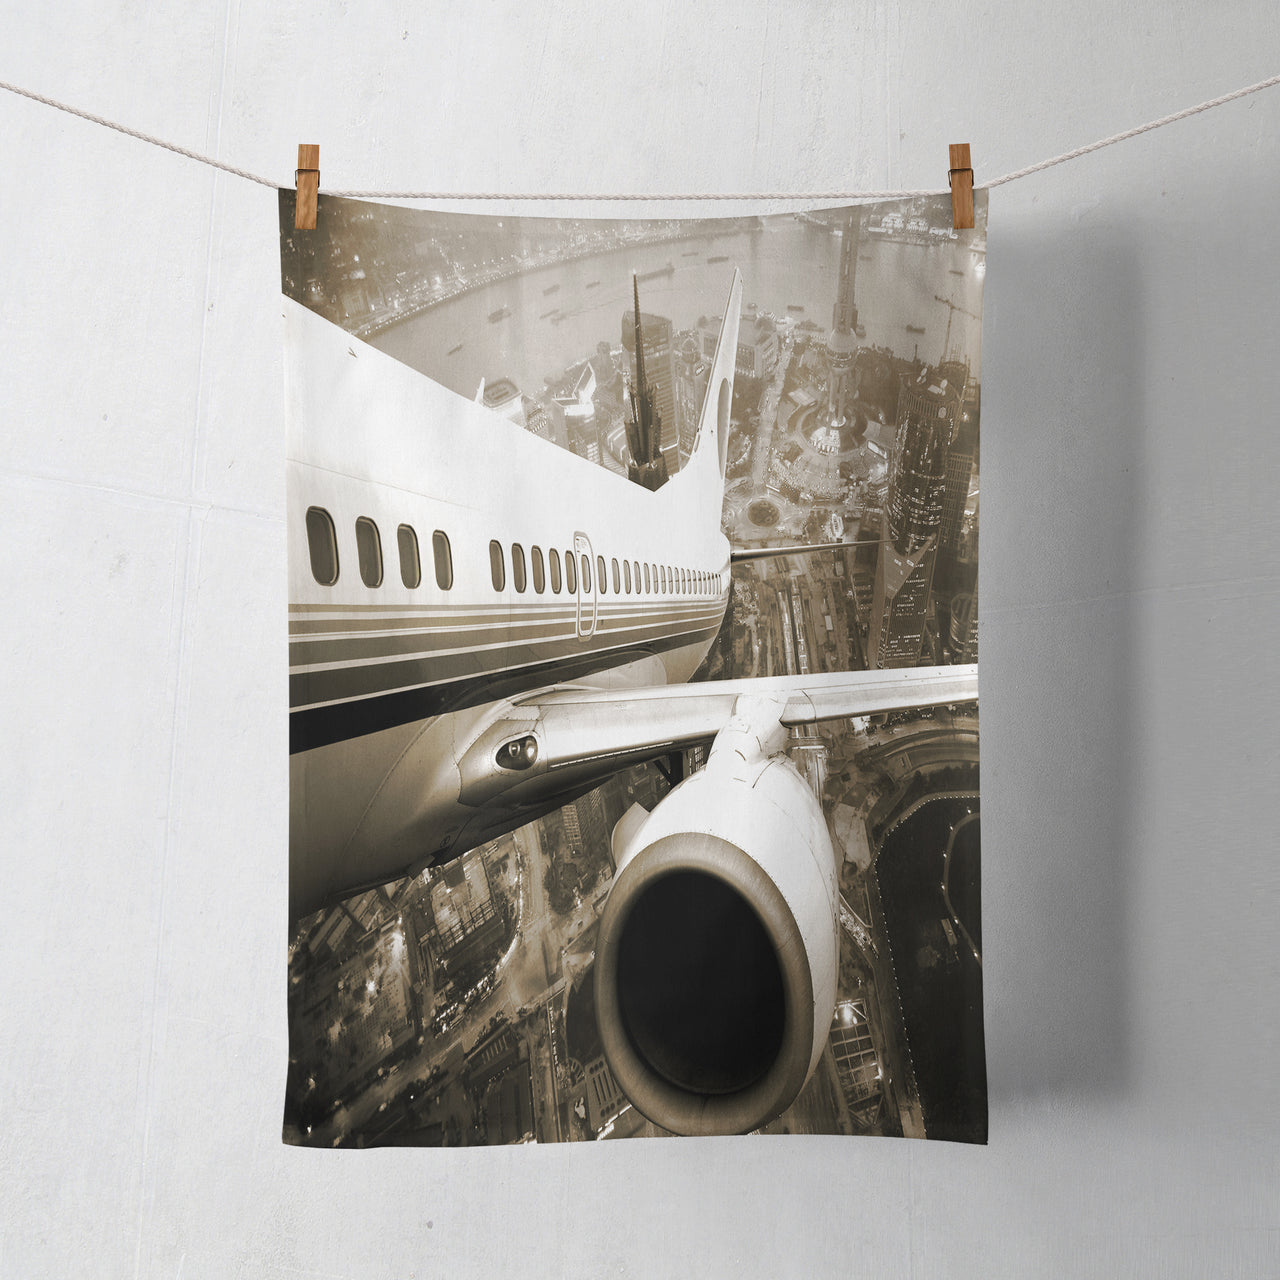 Departing Aircraft & City Scene behind Designed Towels